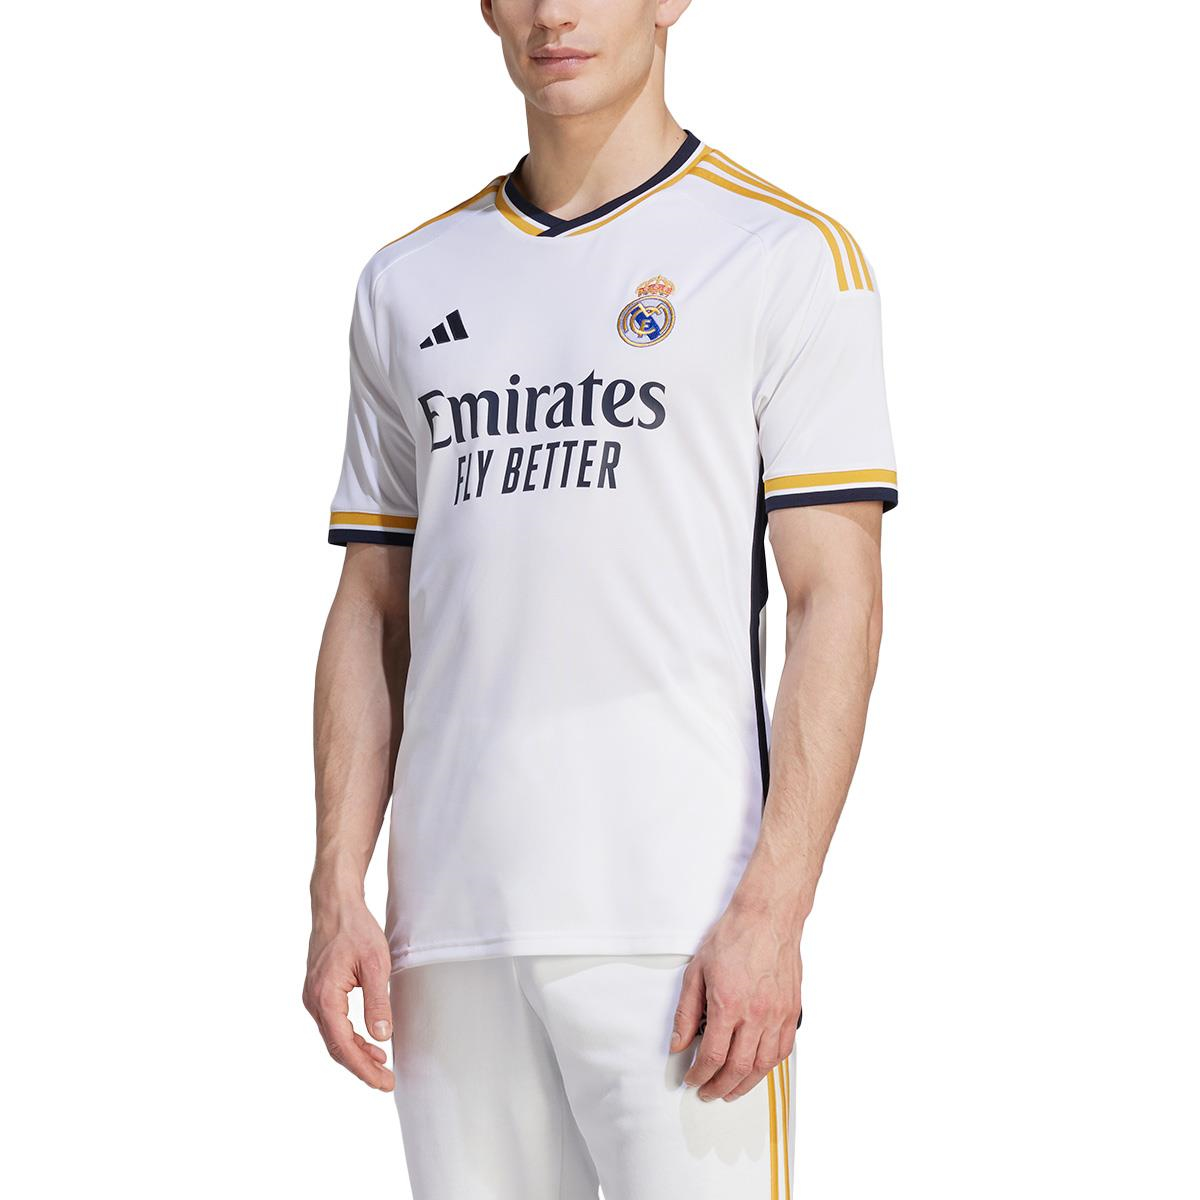 https://www.stadome.com/images/ashx/maillot-domicile-real-madrid-23-24-5.jpeg?s_id=14812&imgfield=s_image5&imgwidth=1200&imgheight=1200